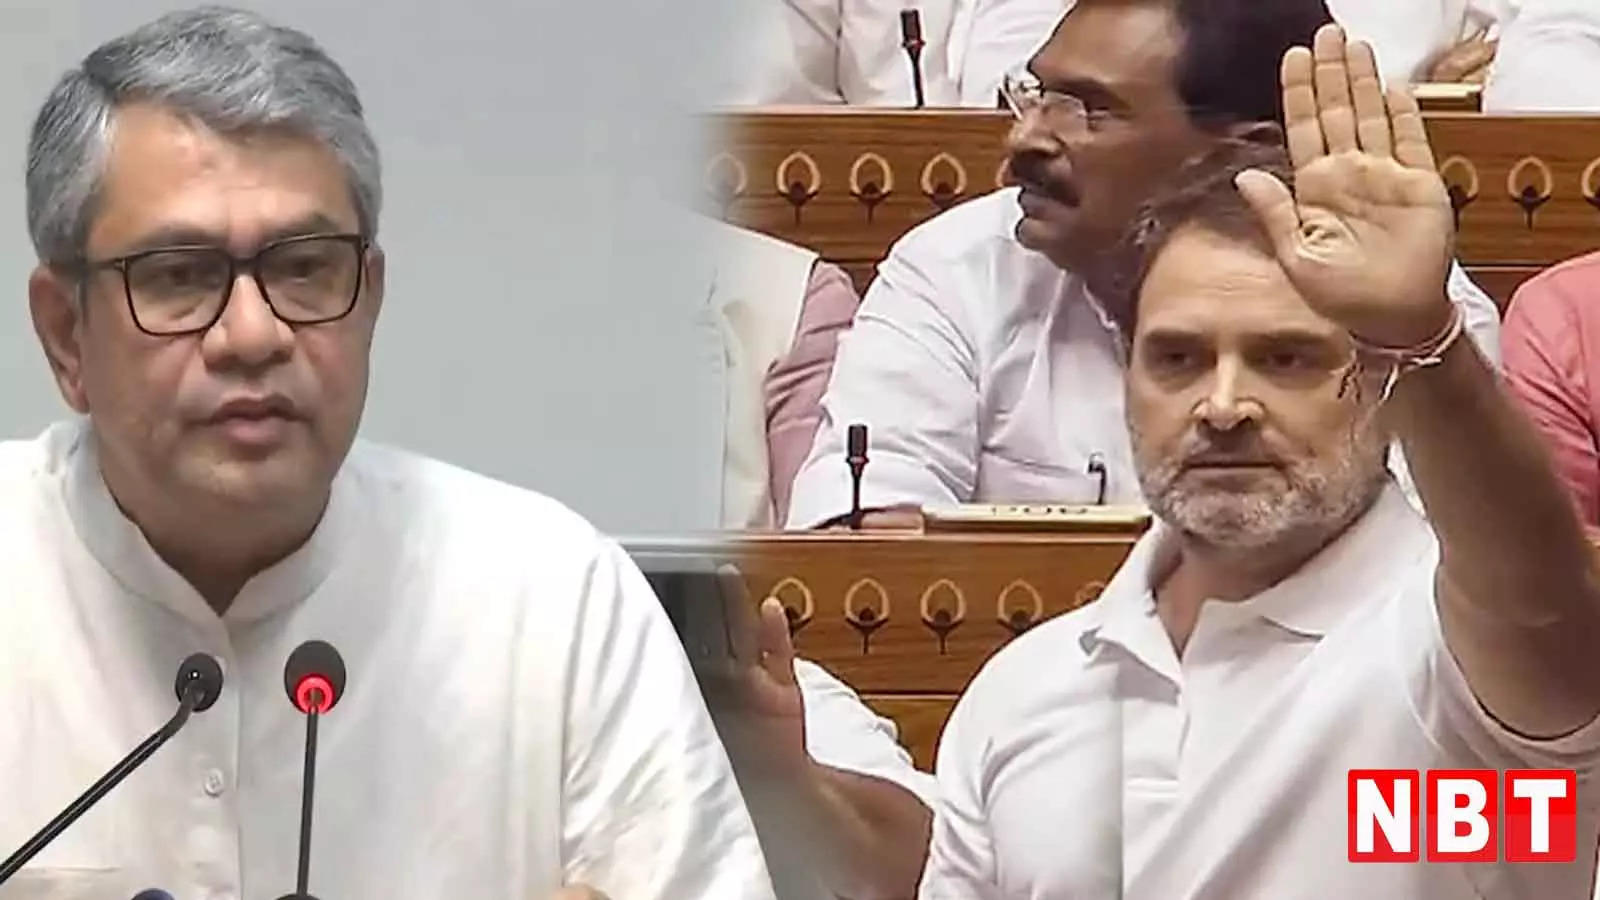 'The Leader of the Opposition has grossly insulted the Hindu society…' Ashwini Vaishnav's retort to Rahul Gandhi's statement in Parliament